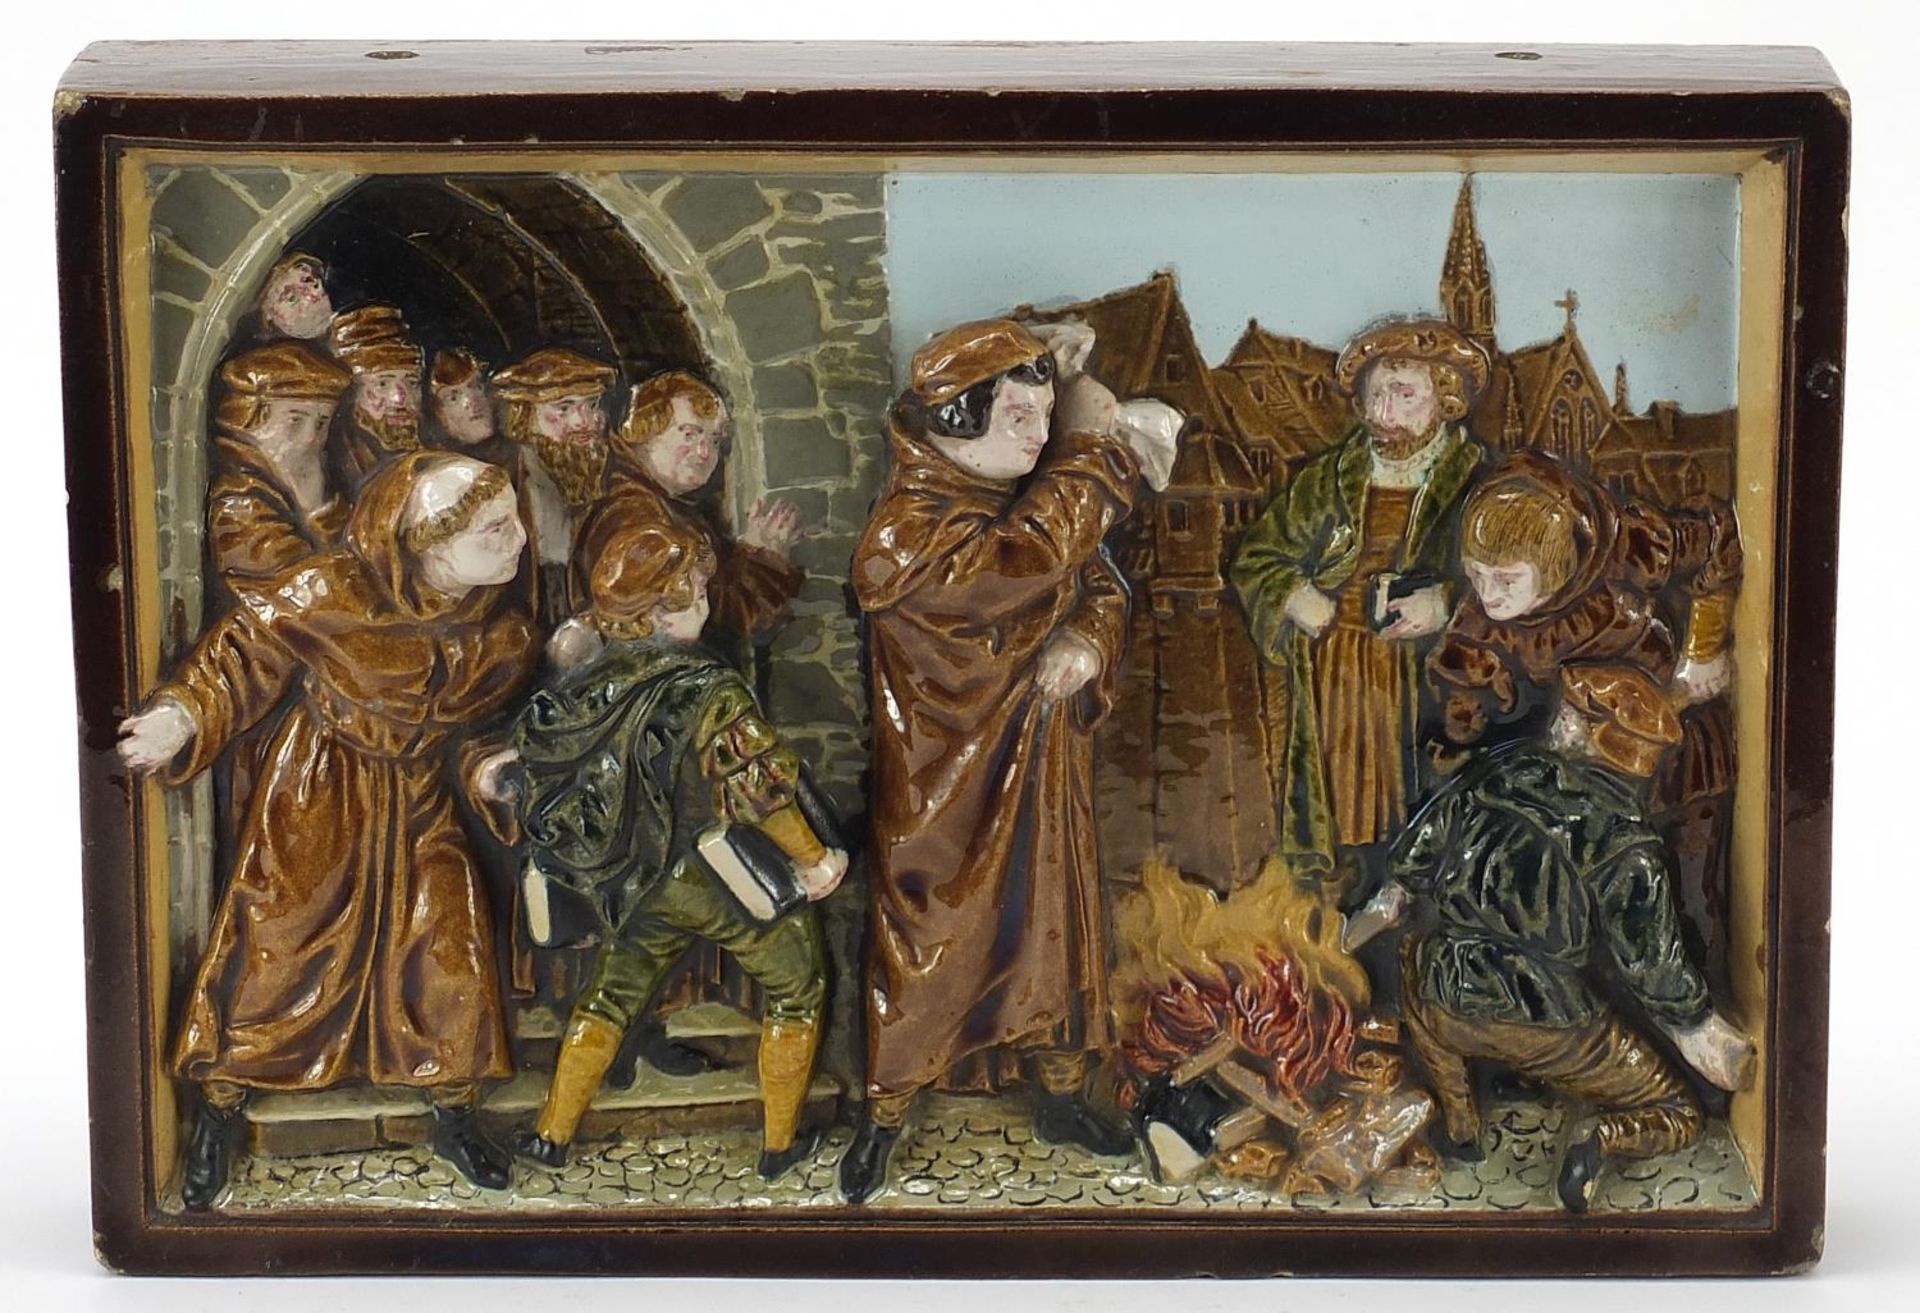 19th century Continental stoneware plaque decorated in relief with religious zealots burning